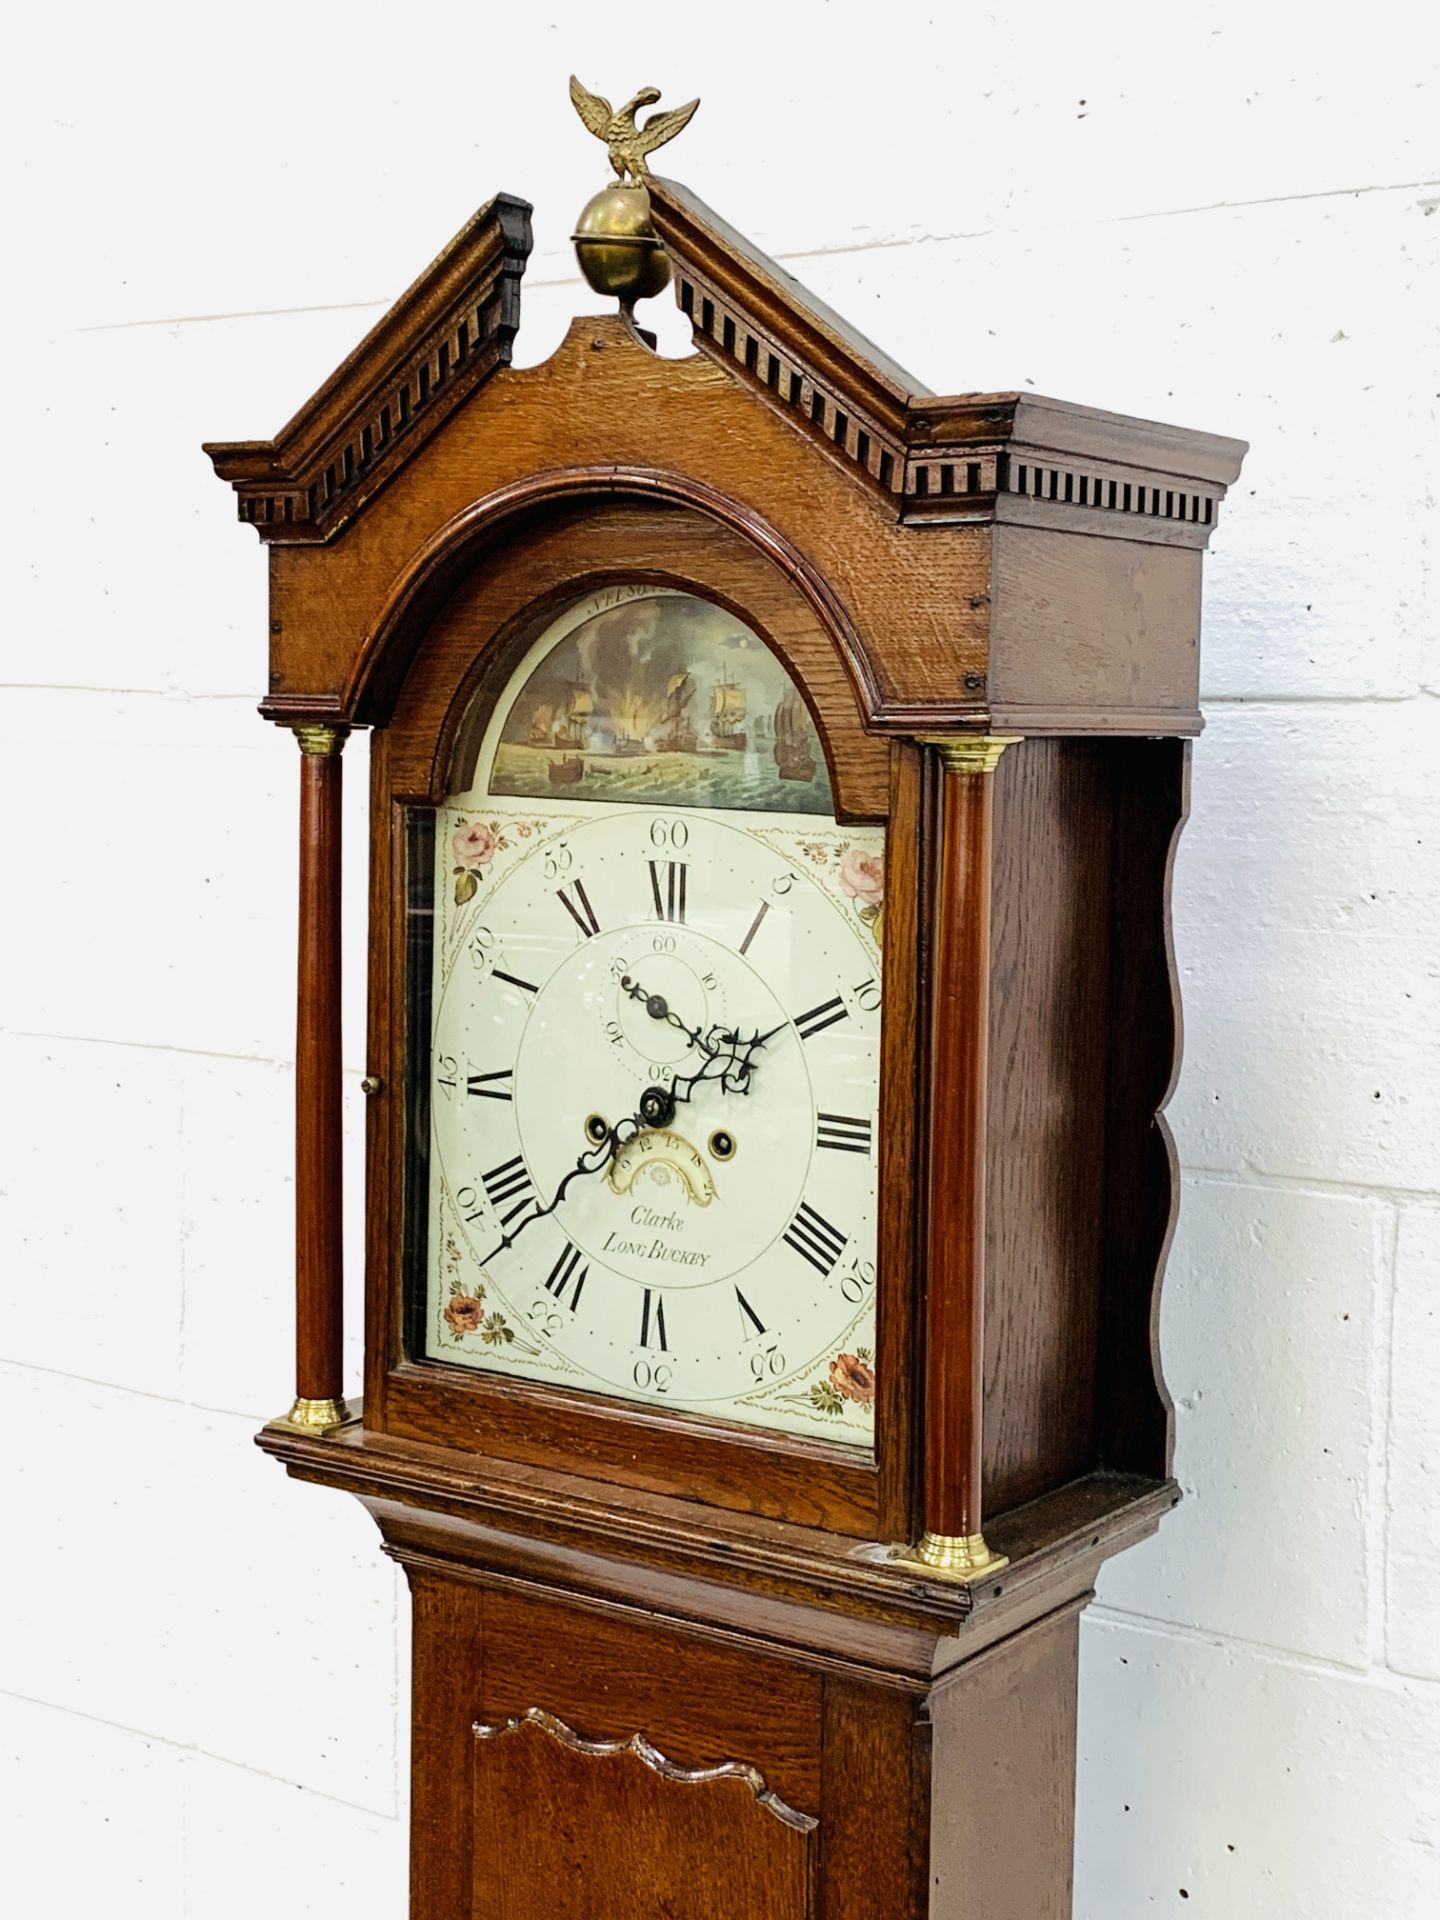 Mahogany long case clock by Clarke of Long Buckby, movement by Wilson - Image 4 of 9